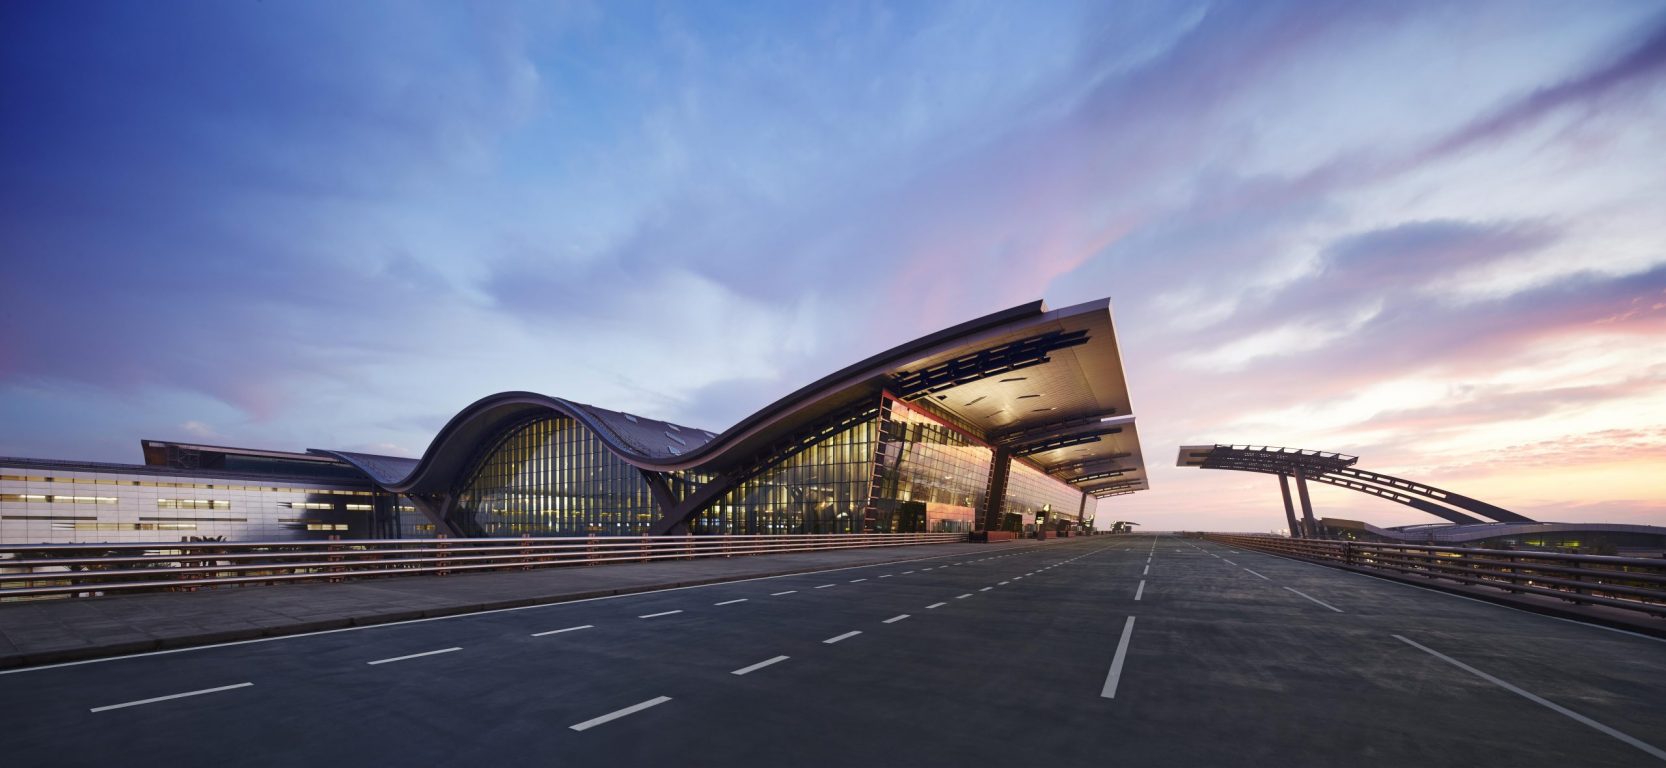 Updates on Short-Term Parking Rates at Hamad International Airport